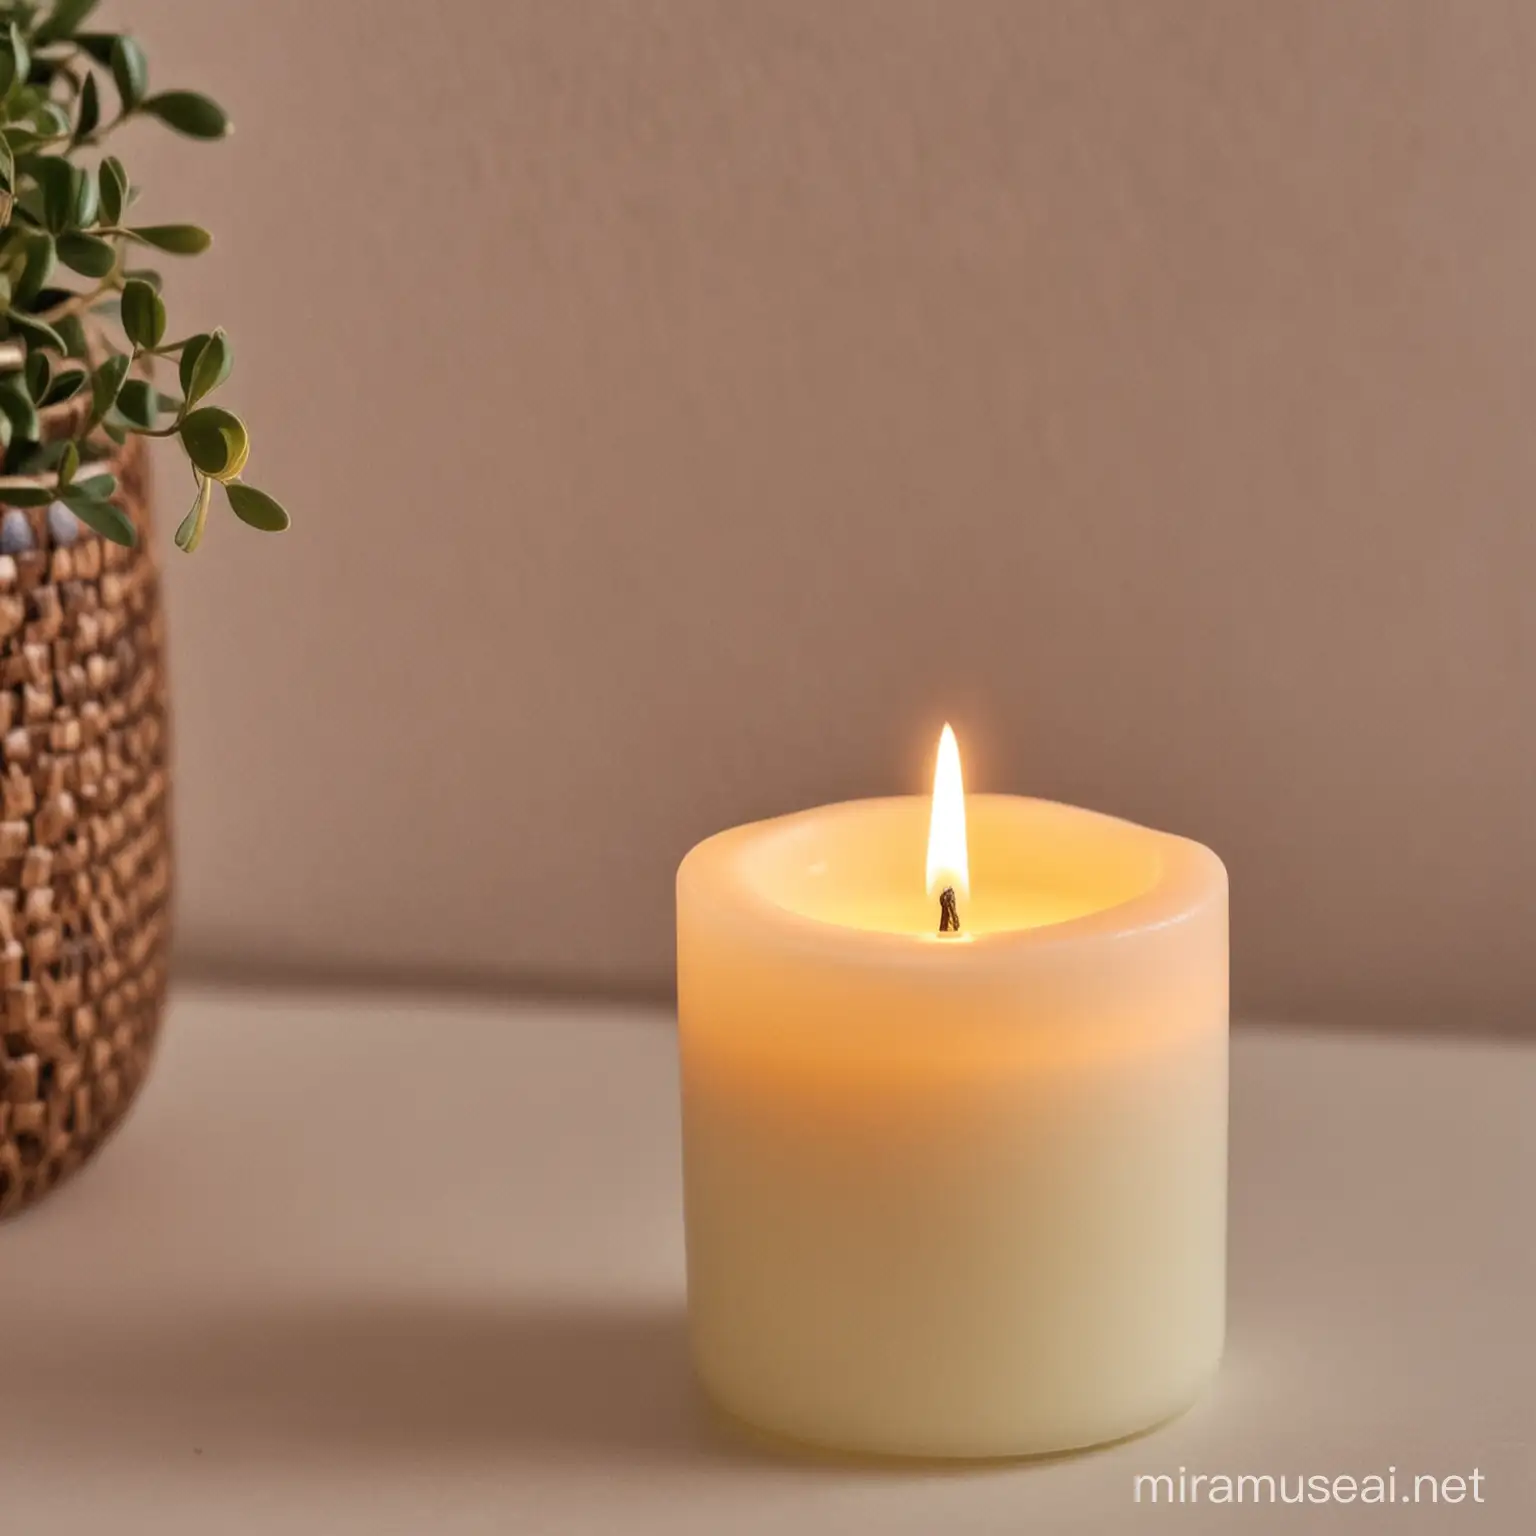 Relaxed Atmosphere Candlelit Serenity at Home